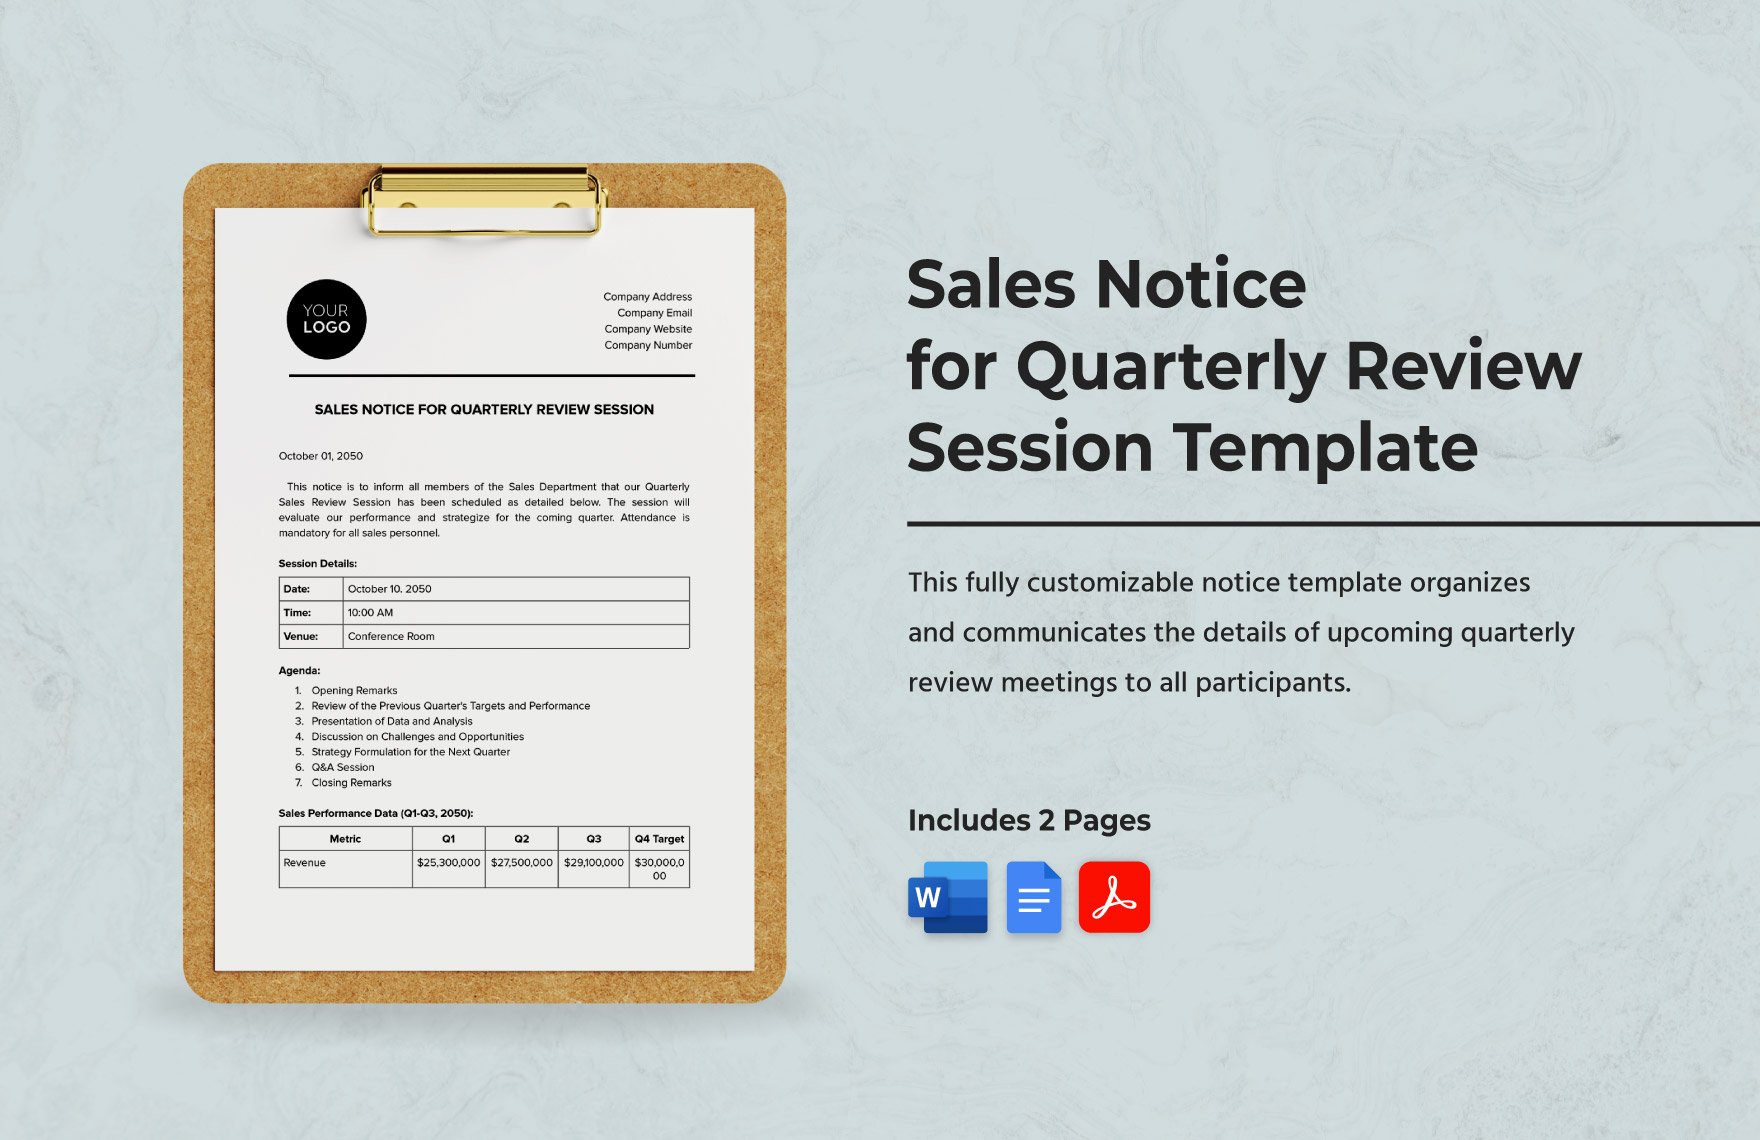 Sales Notice for Quarterly Review Session Template in Word, Google Docs, PDF